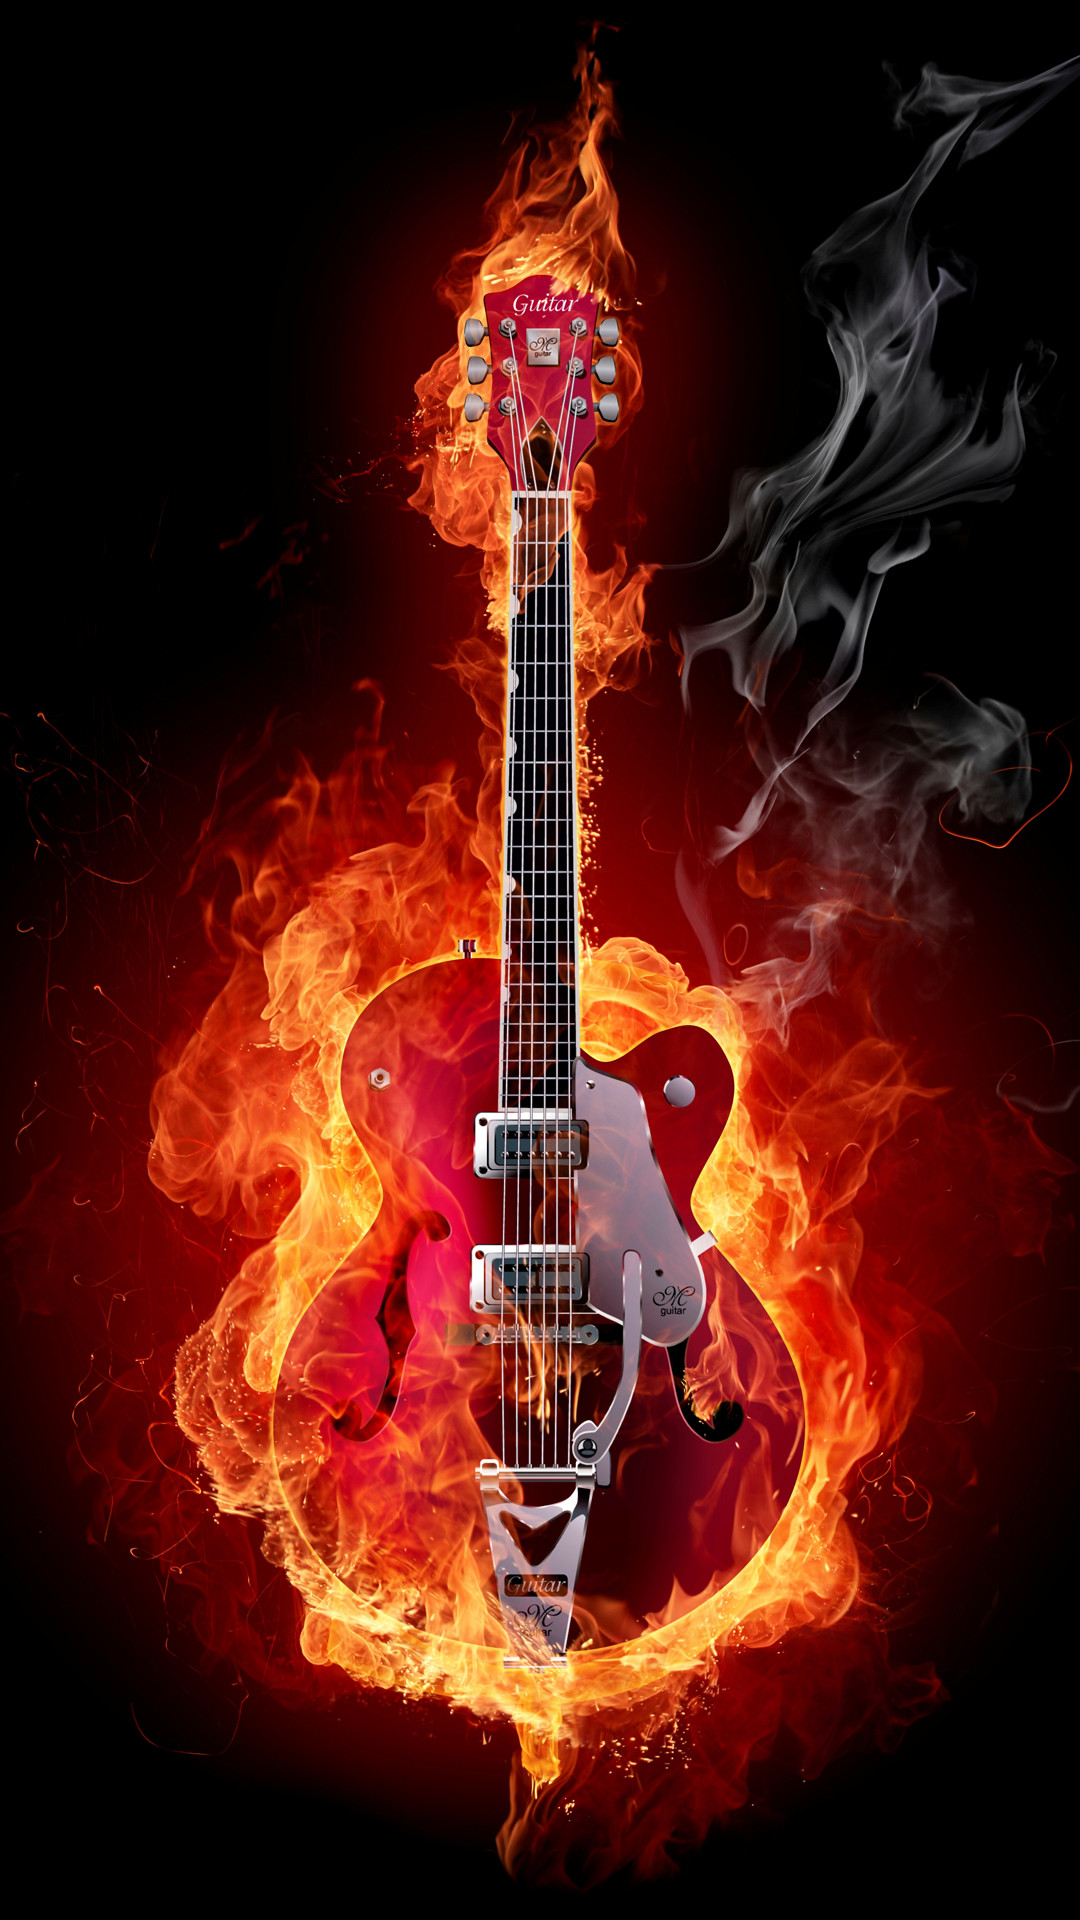 Guitar on Fire Wallpaper (64+ images)